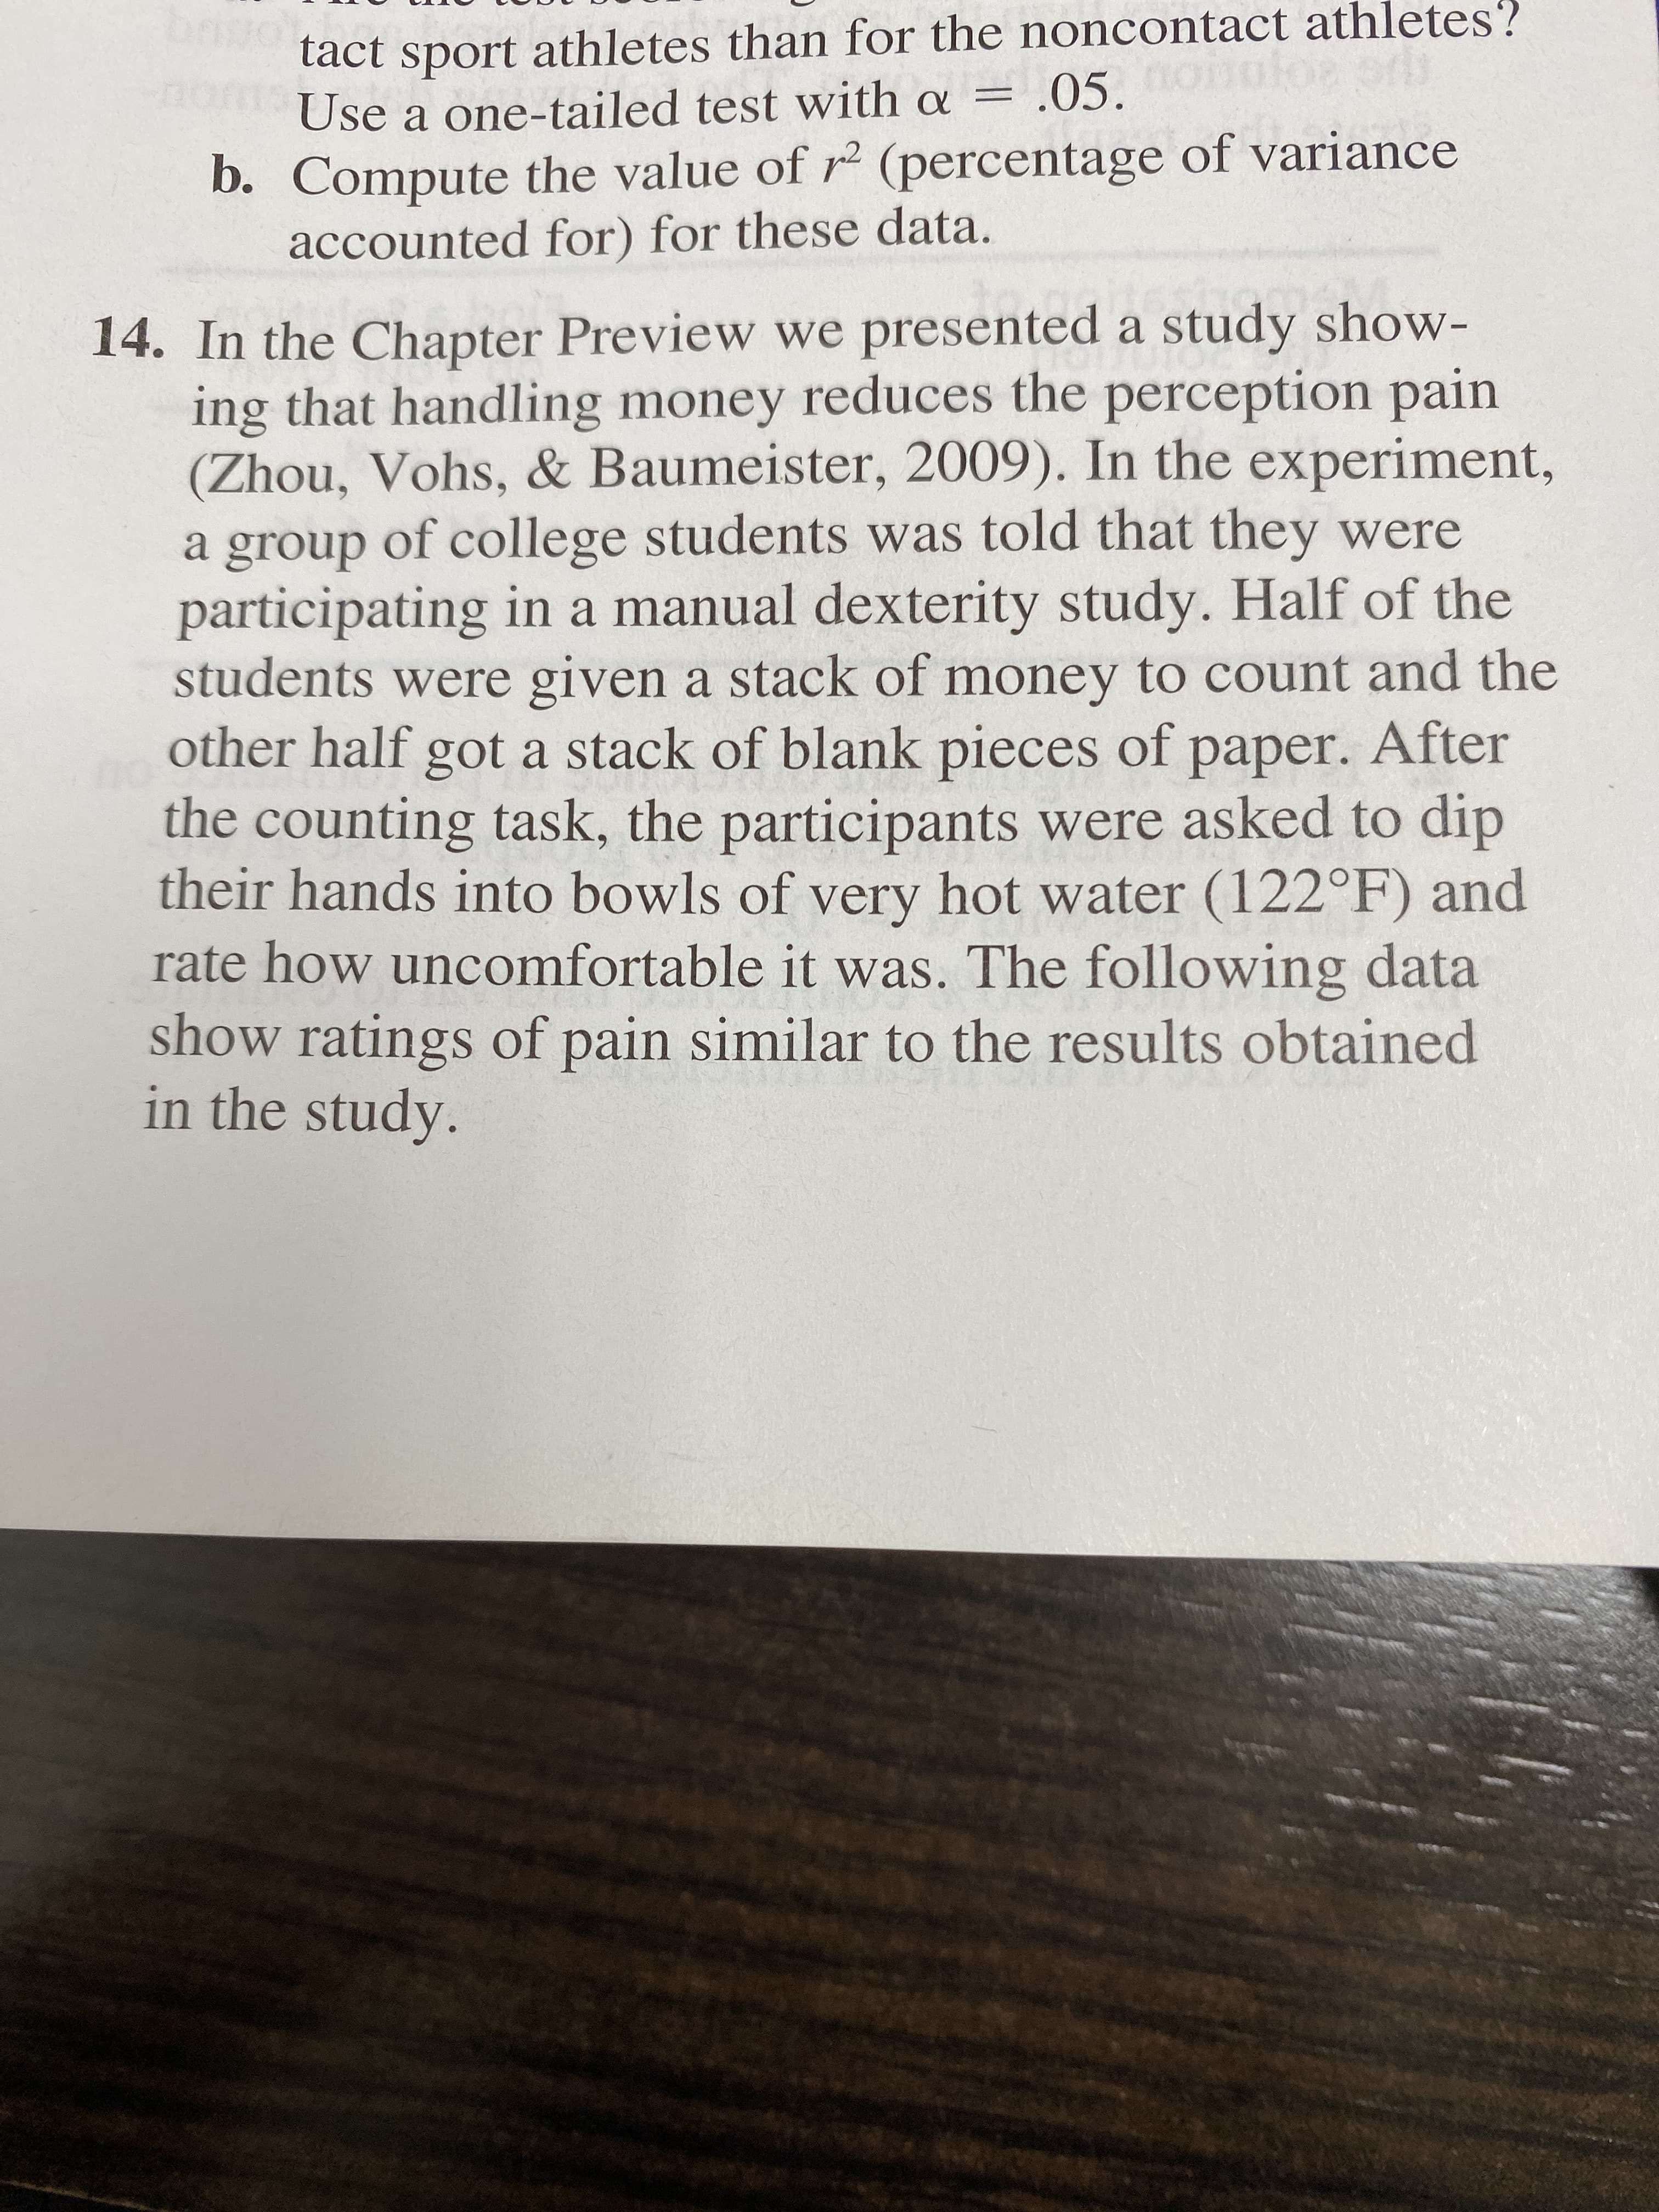 tact sport athletes than for the noncontact athletes?
Use a one-tailed test with a = .05.
b. Compute the value of r (percentage of variance
accounted for) for these data.
14. In the Chapter Preview we presented a study show-
ing that handling money reduces the perception pain
(Zhou, Vohs, & Baumeister, 2009). In the experiment,
a group of college students was told that they were
participating in a manual dexterity study. Half of the
students were given a stack of money to count and the
other half gota stack of blank pieces of paper. After
the counting task, the participants were asked to dip
their hands into bowls of very hot water (122°F) and
rate how uncomfortable it was. The following data
show ratings of pain similar to the results obtained
in the study.
